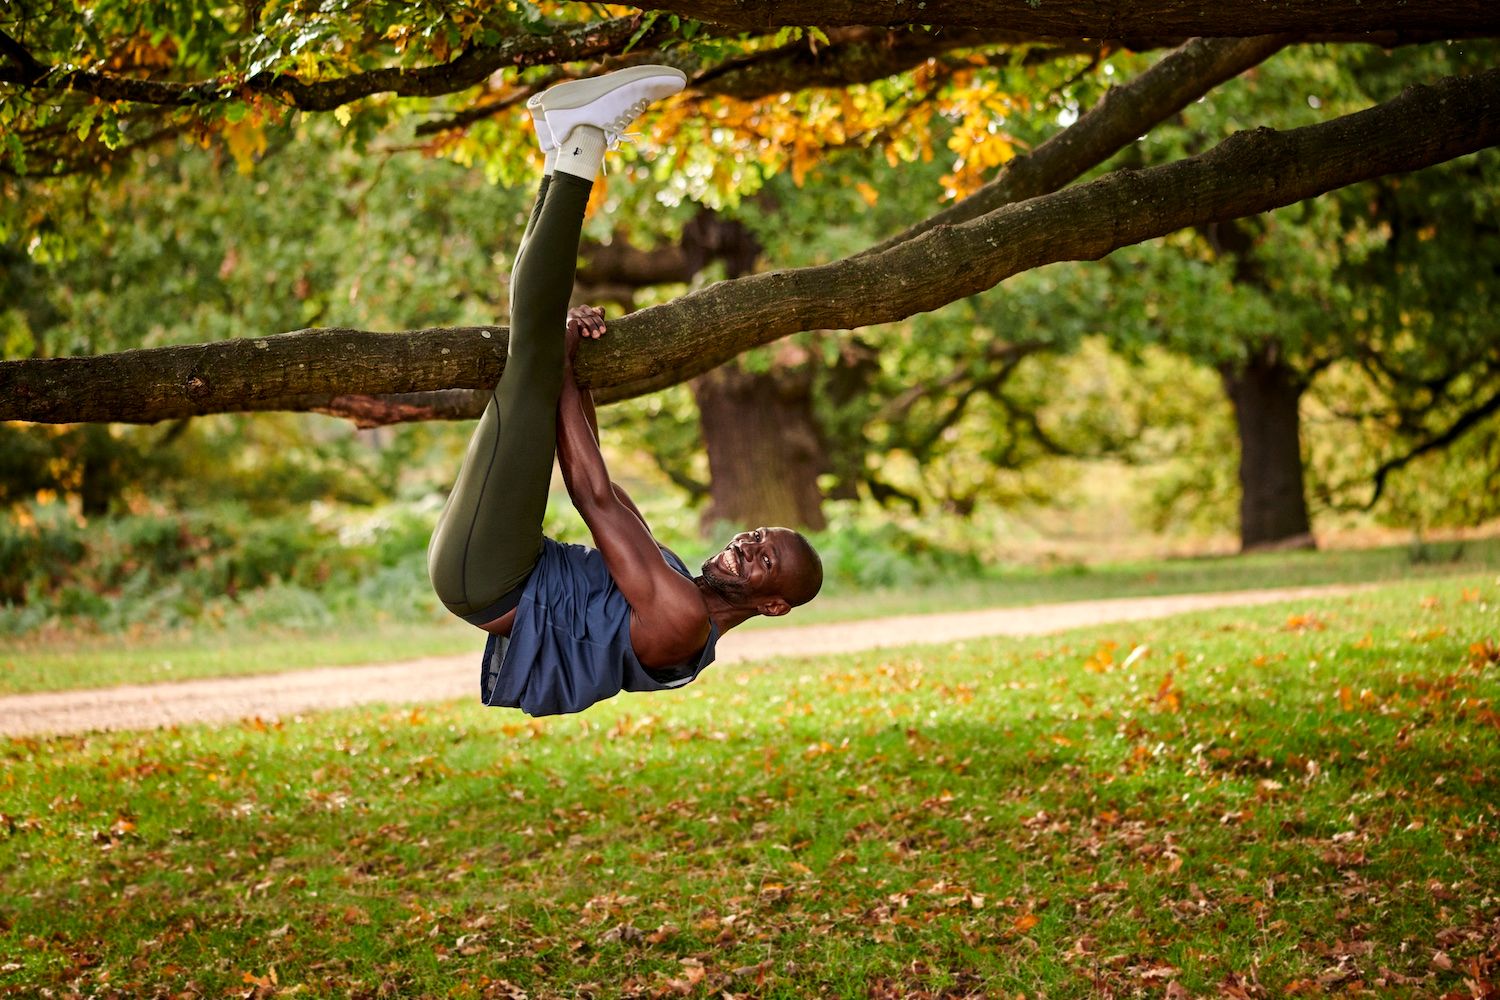 A man hangs smiling upside down from a tree branch, enjoying his exercise outdoors in London Sock Company sports socks